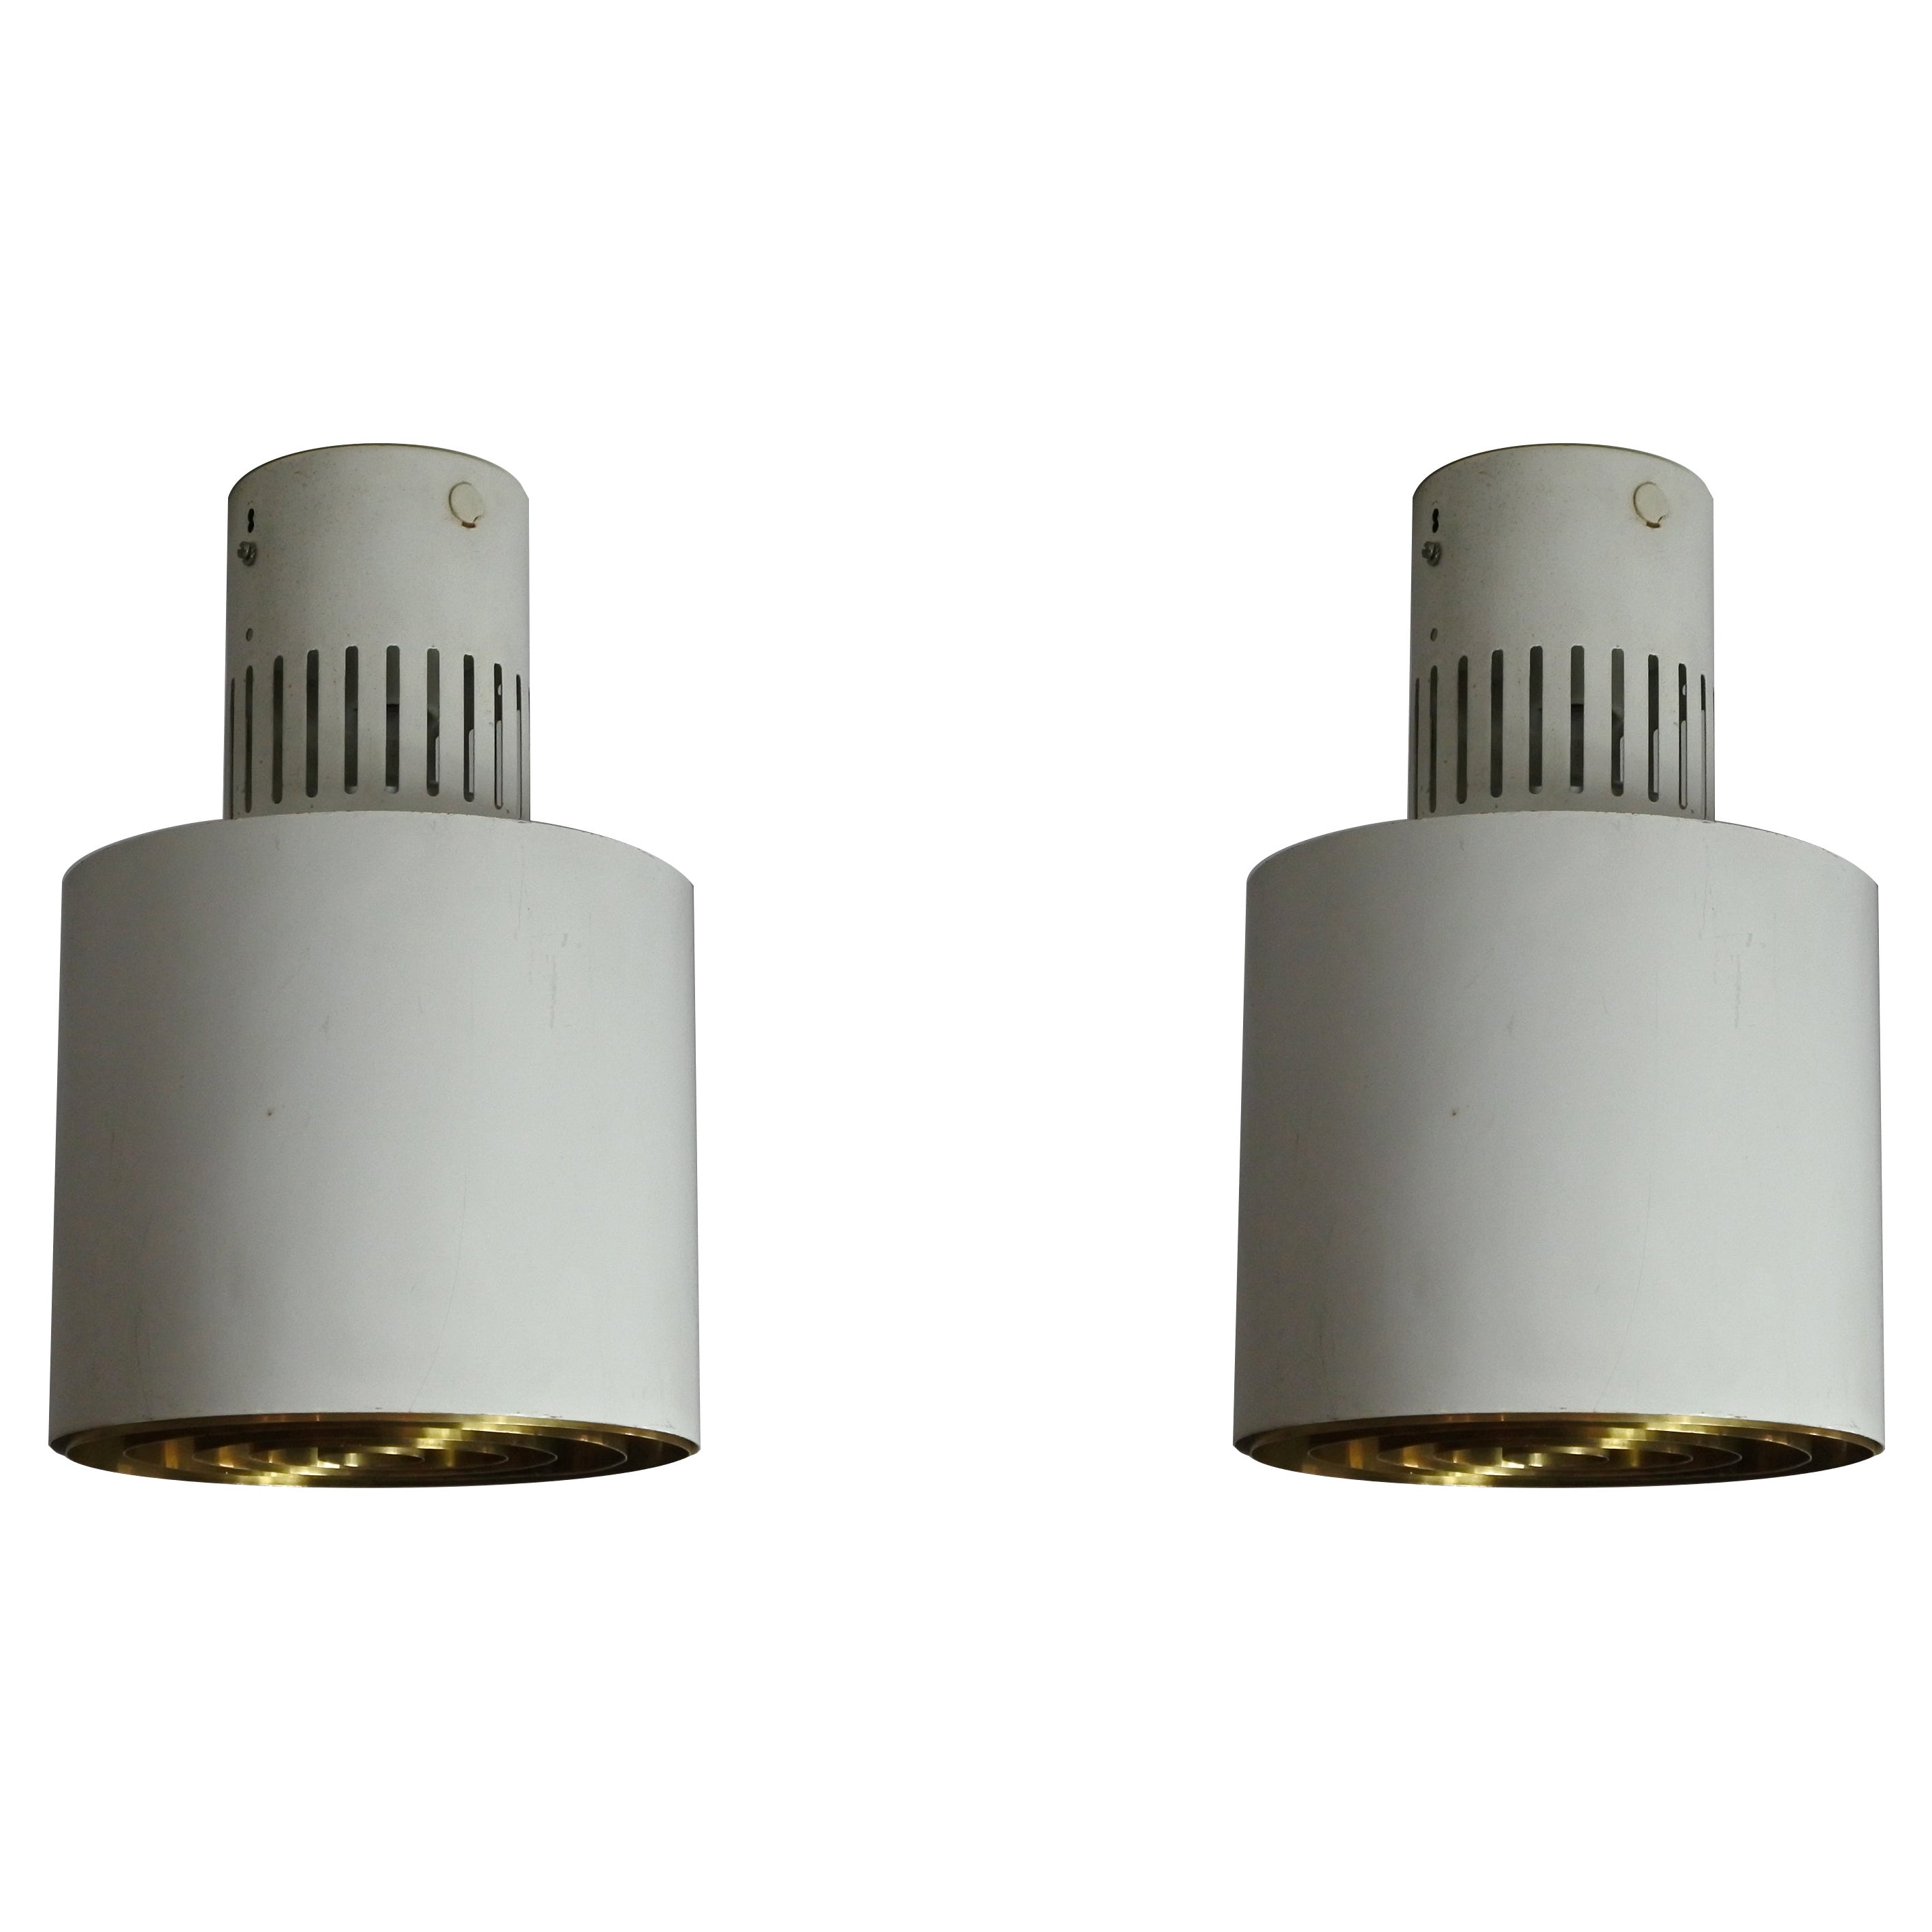 Two Flush Mount Ceiling Lights by Lisa Johansson-Pape & Orno, Finland 1950s